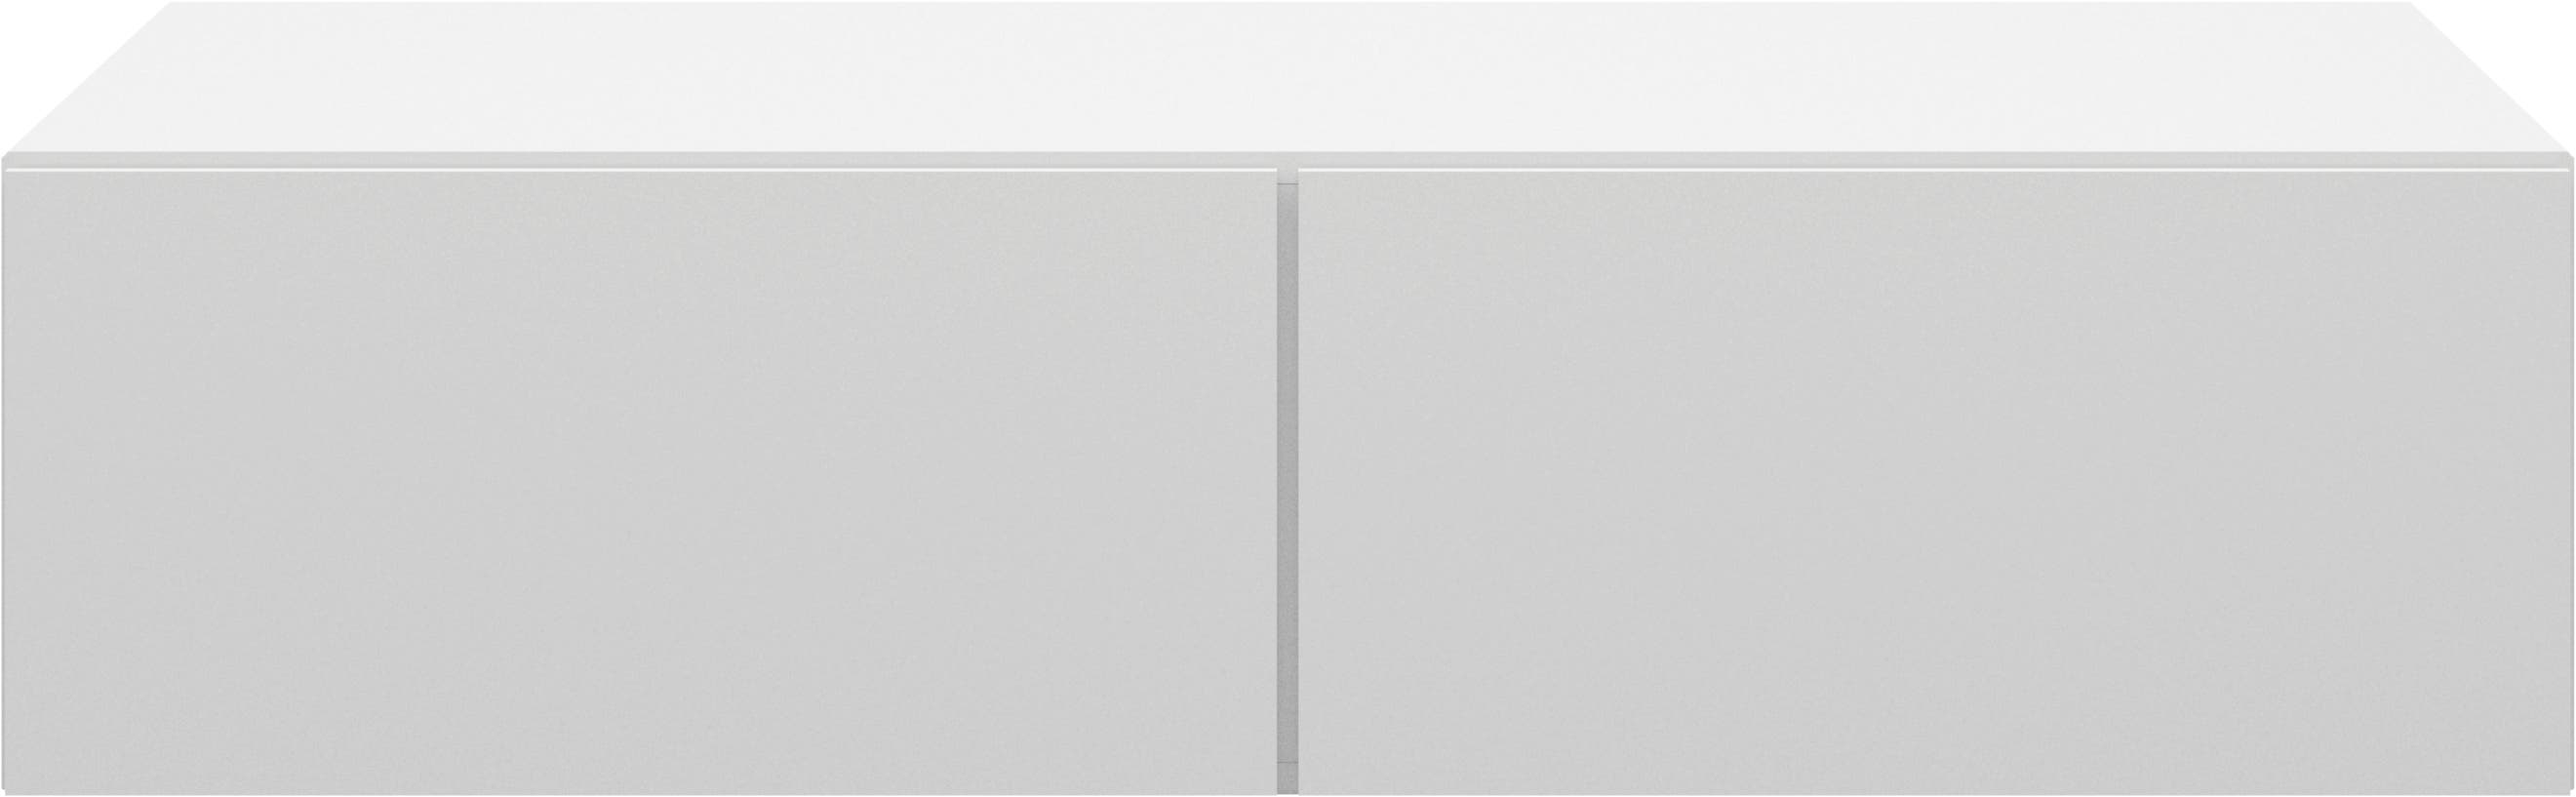 Lugano wall mounted cabinet with drop-down doors